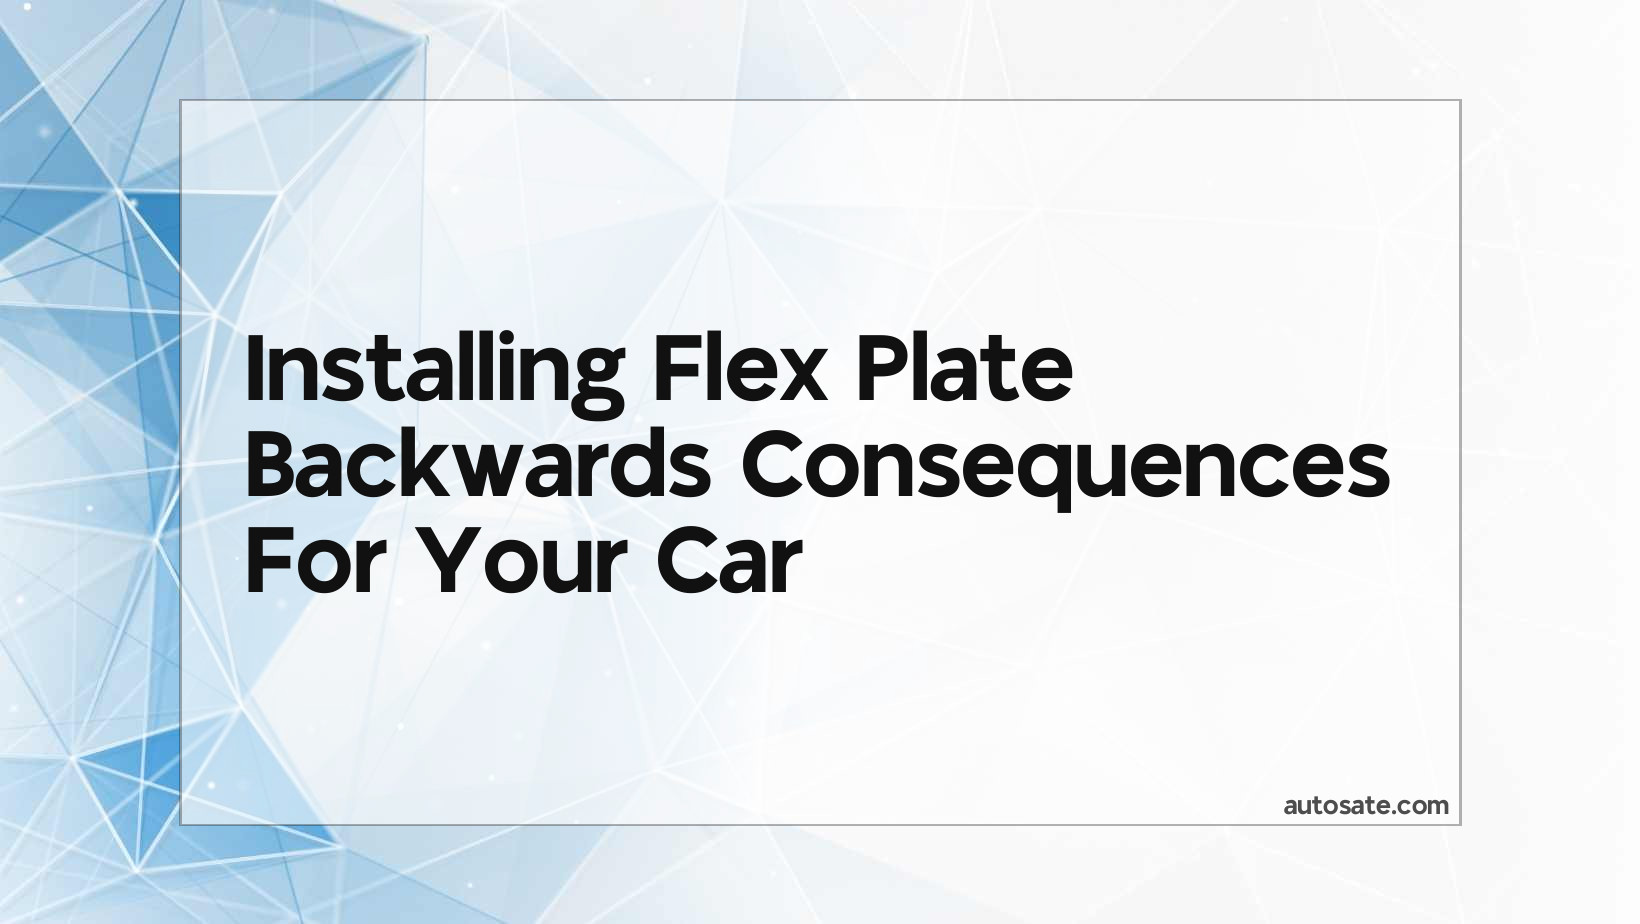 Installing Flex Plate Backwards Consequences For Your Car